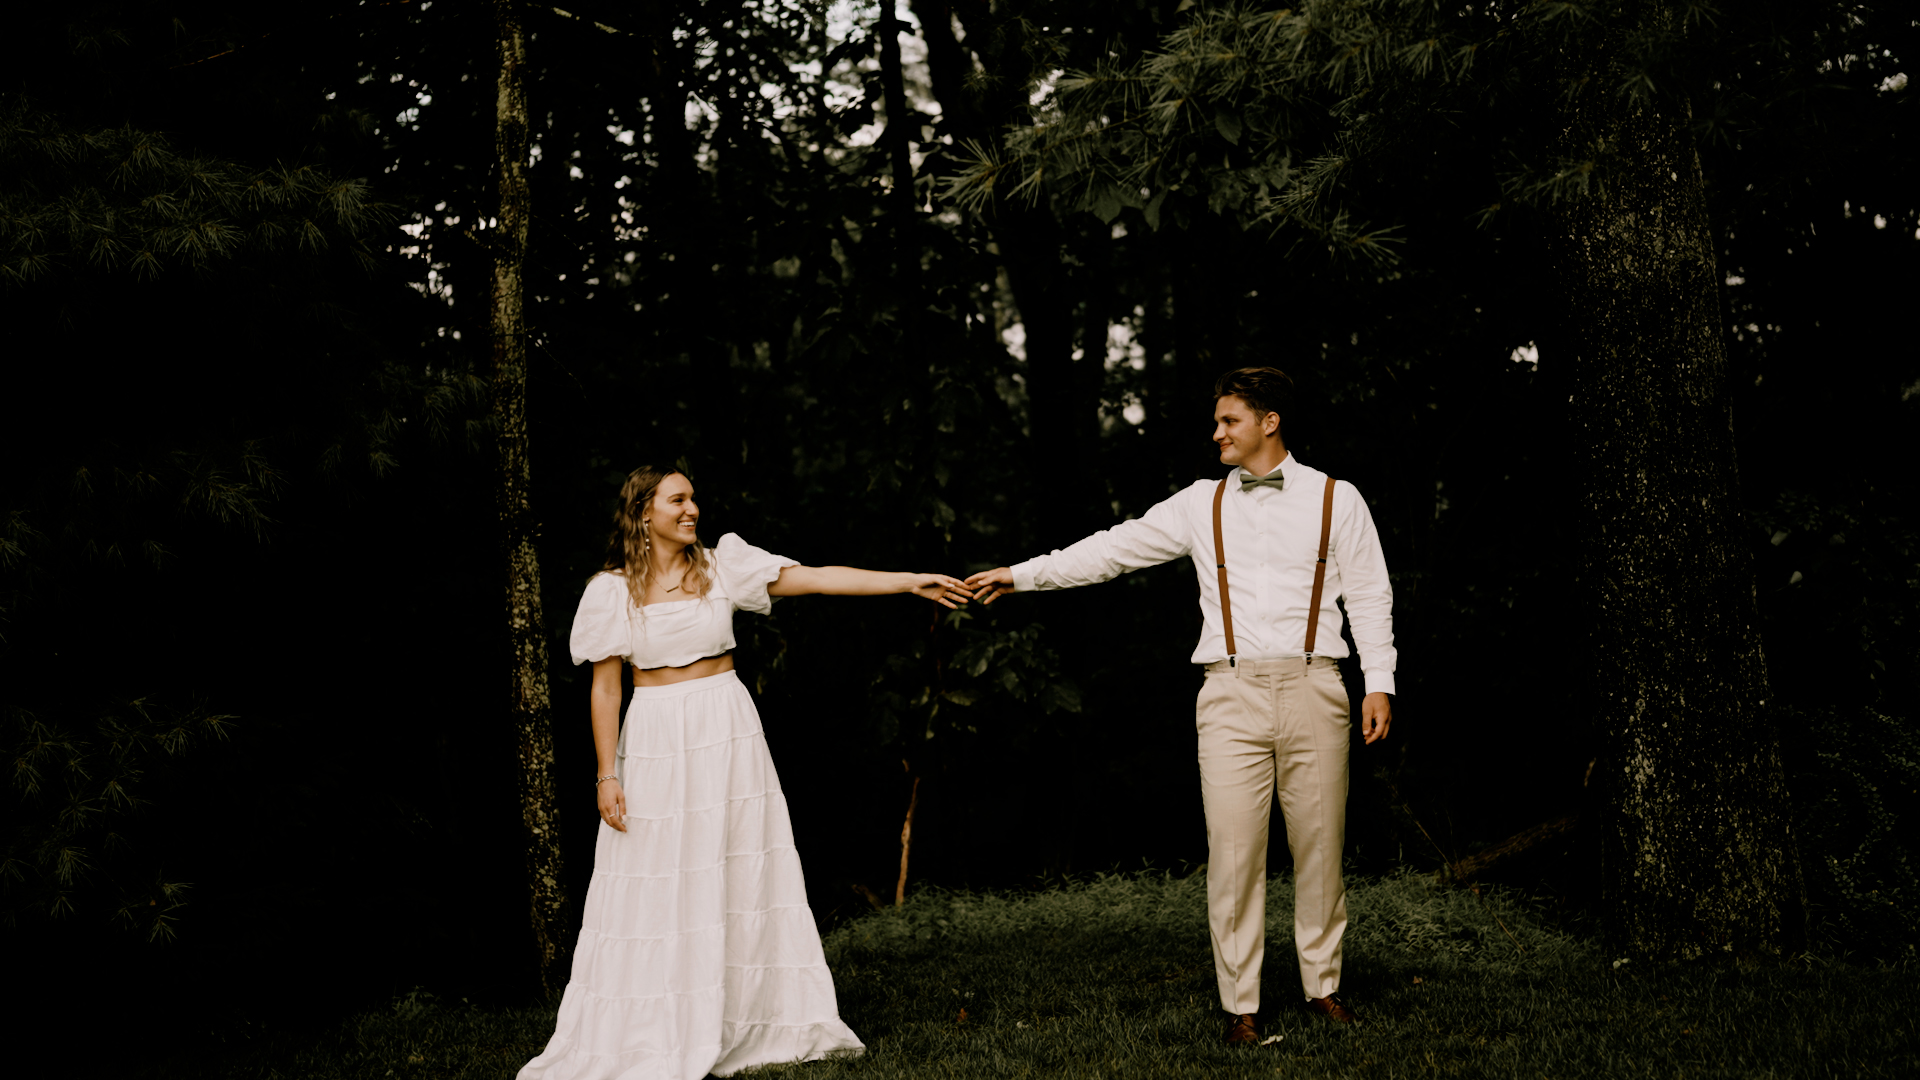 Small Forest Films | New York Wedding Videographer